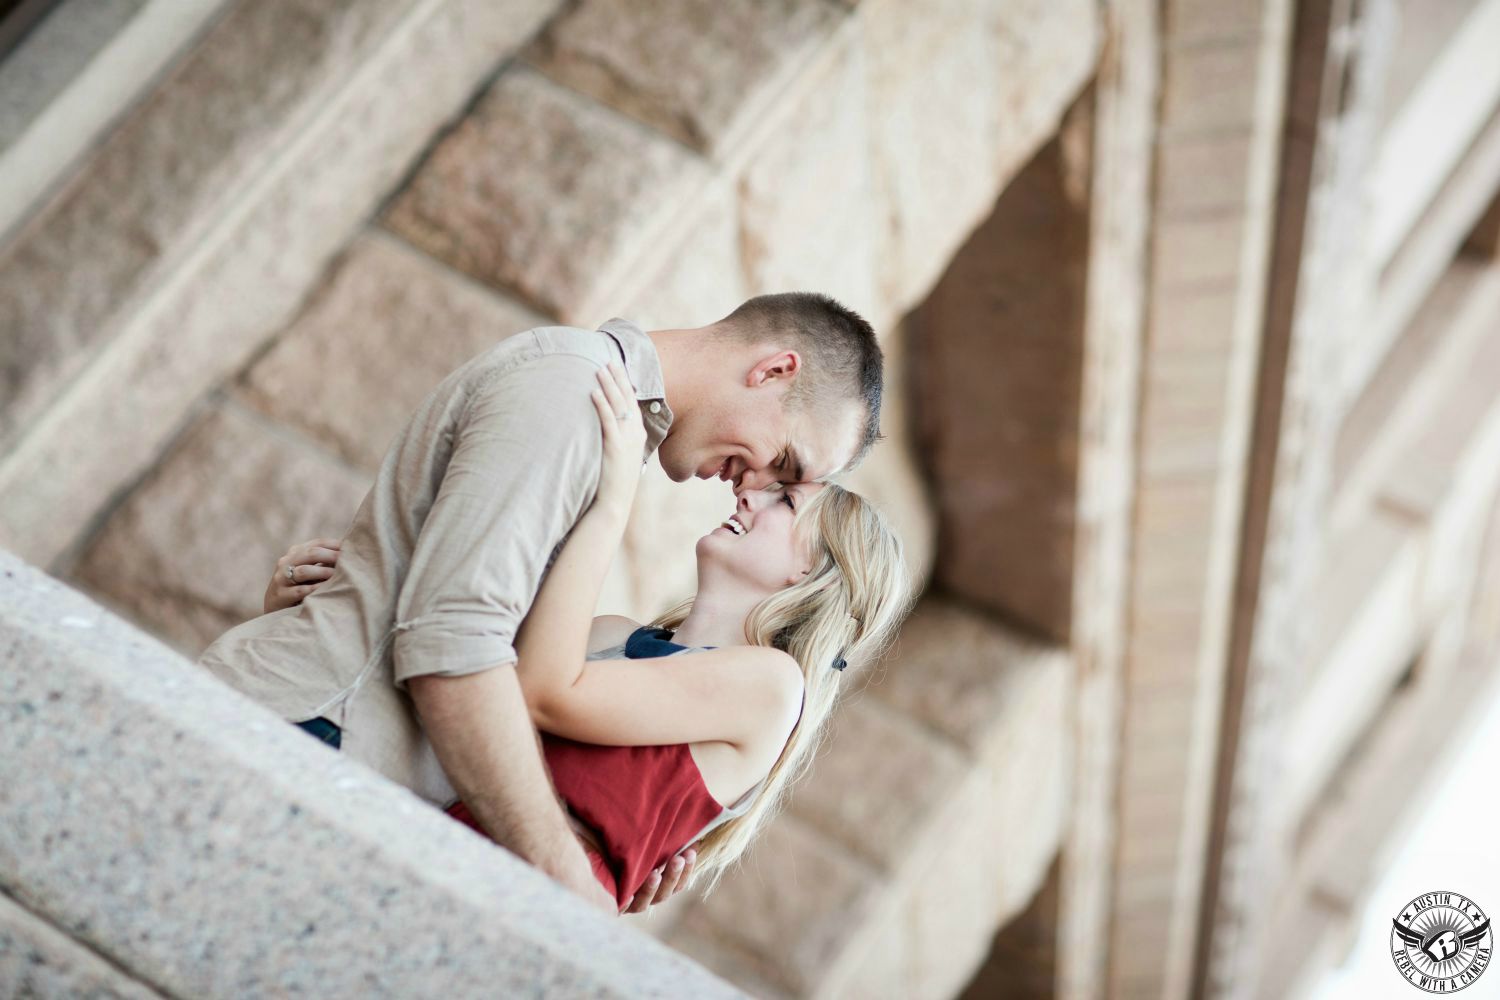 Happy blond girl in a maroon tank top looks into the eyes  of a dark haired happy guy with a tan dress shirt in front of ping granite  rough hewn stonework in this romantic engagement picture at the Texas State Capital in Austin.